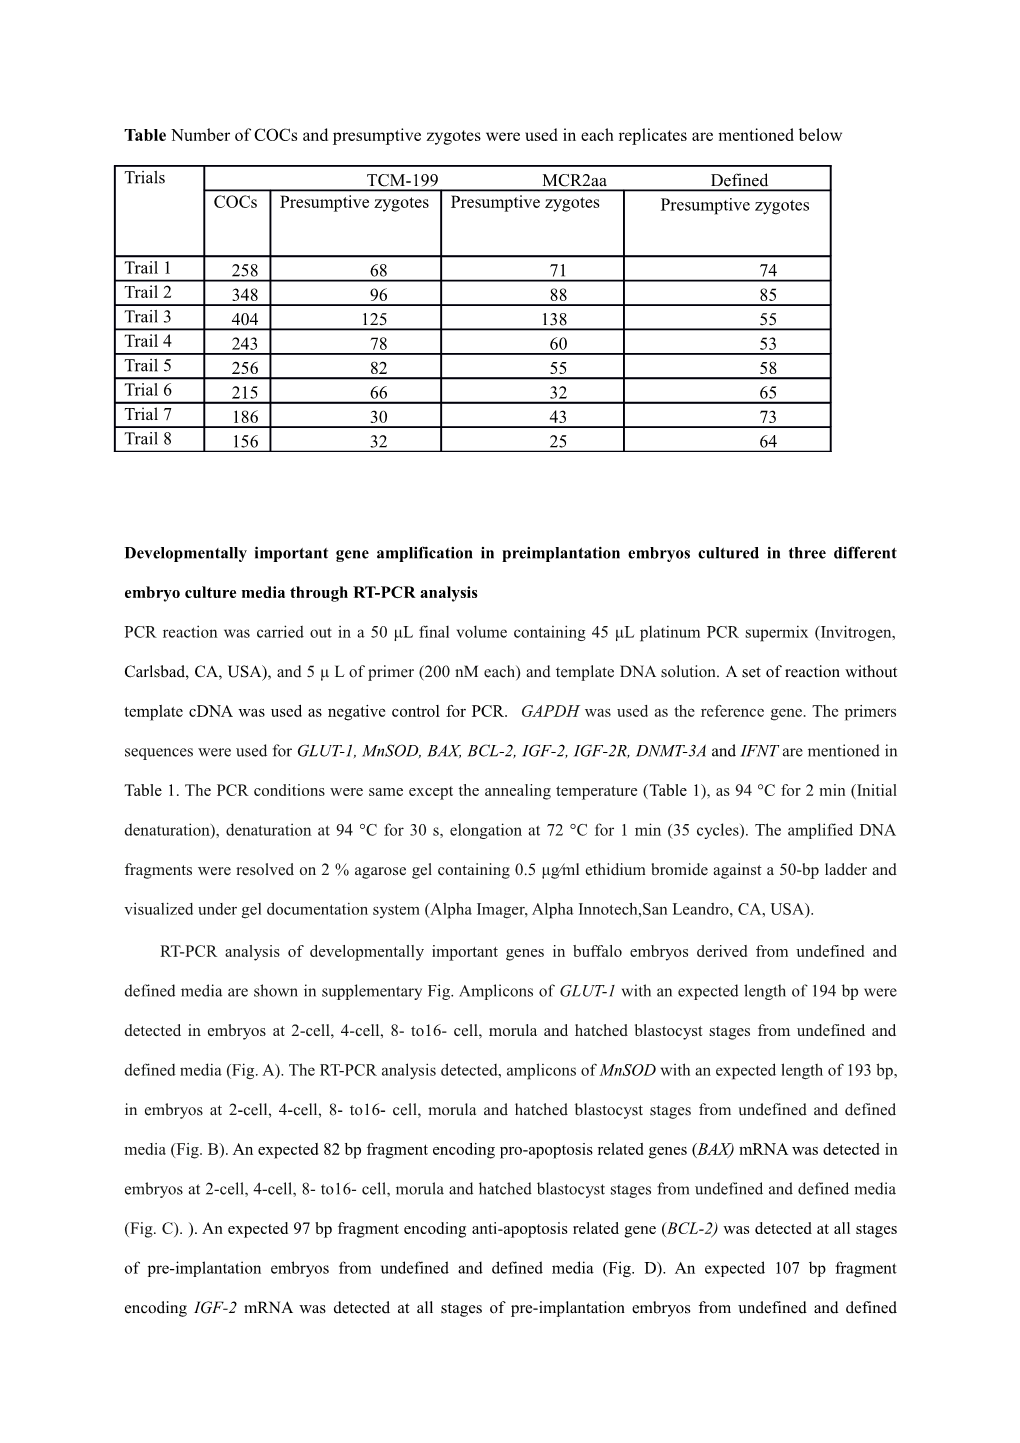 Table Number of Cocs and Presumptive Zygotes Were Used in Each Replicates Are Mentioned Below